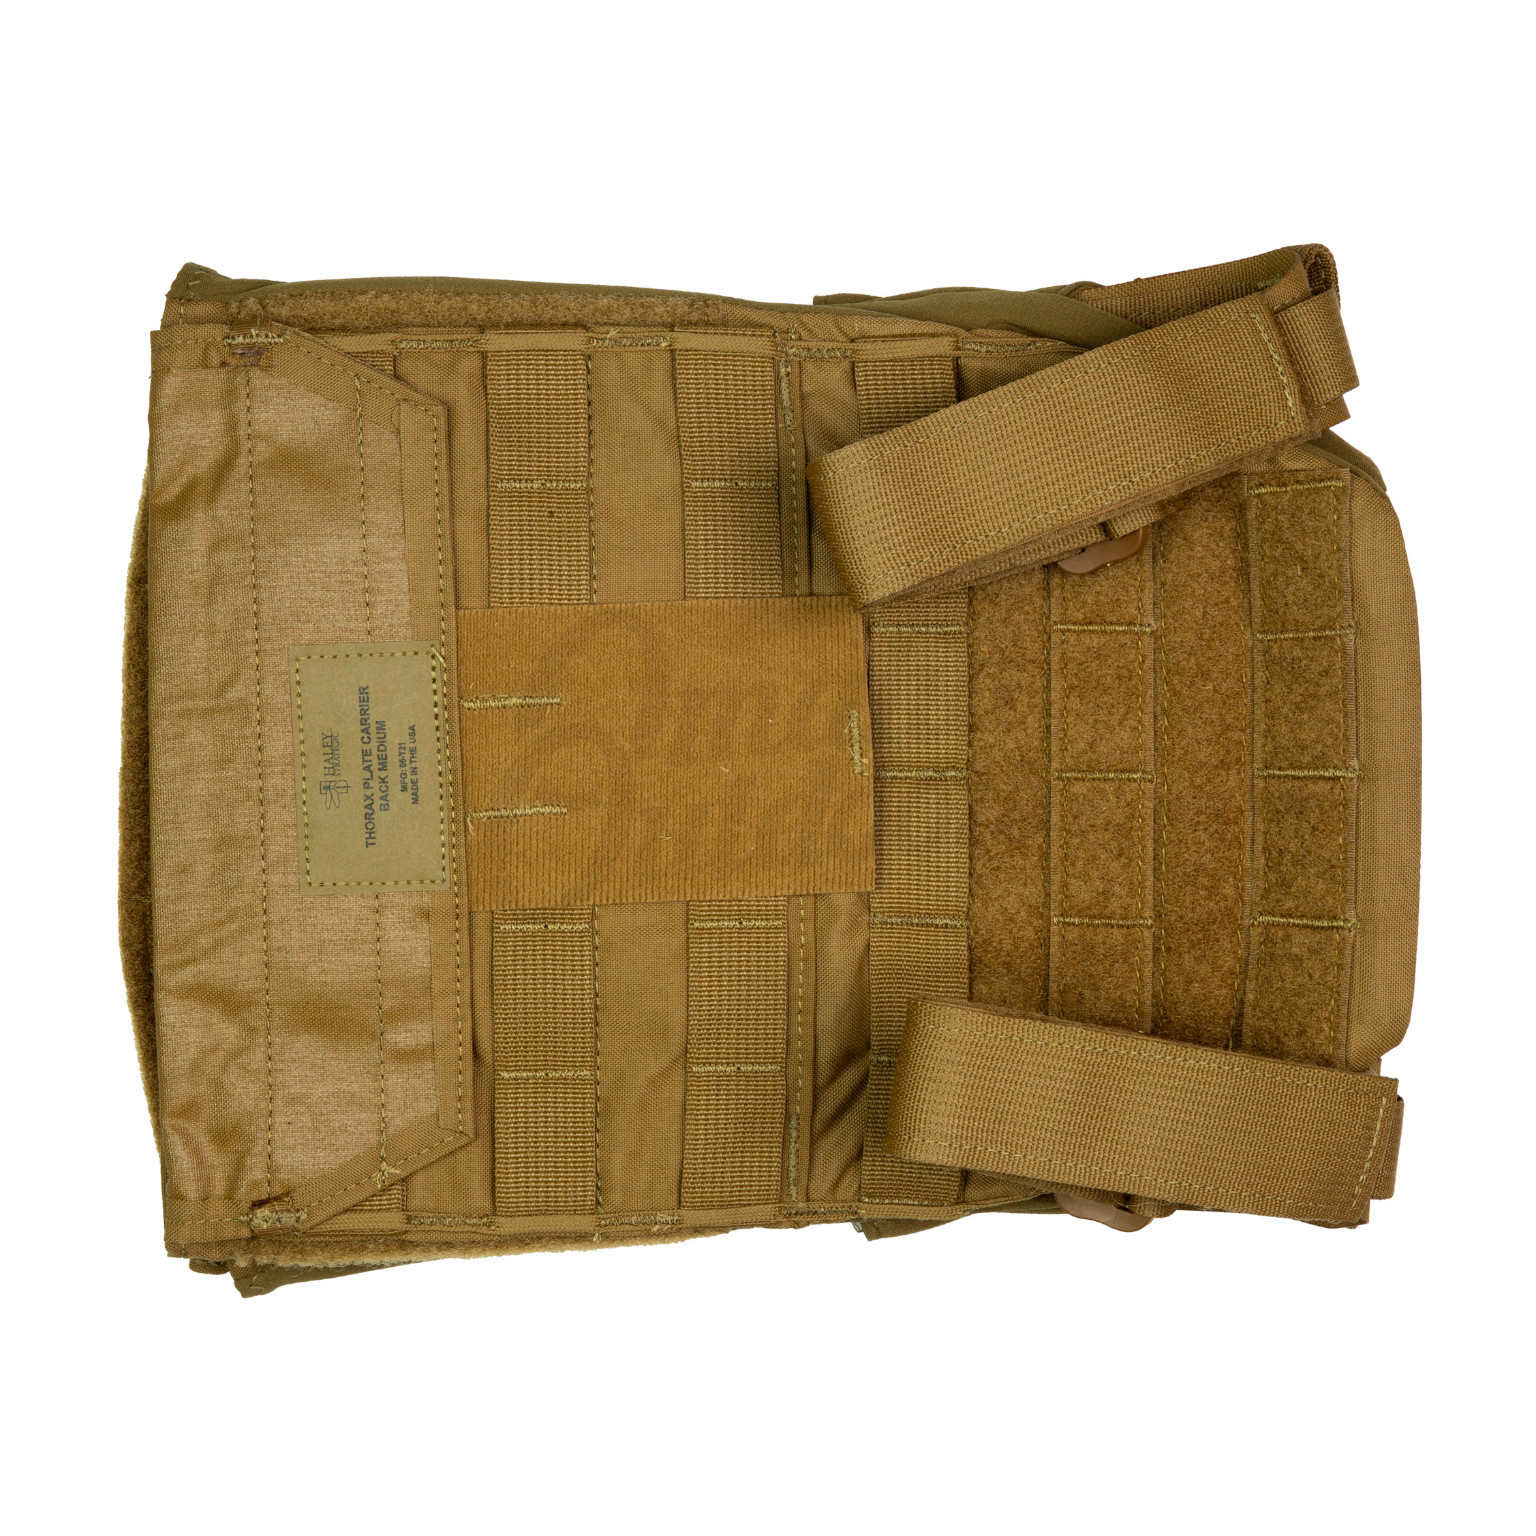 Haley Strategic Thorax Plate Carrier Coyote Brown Medium Omaha Outdoors